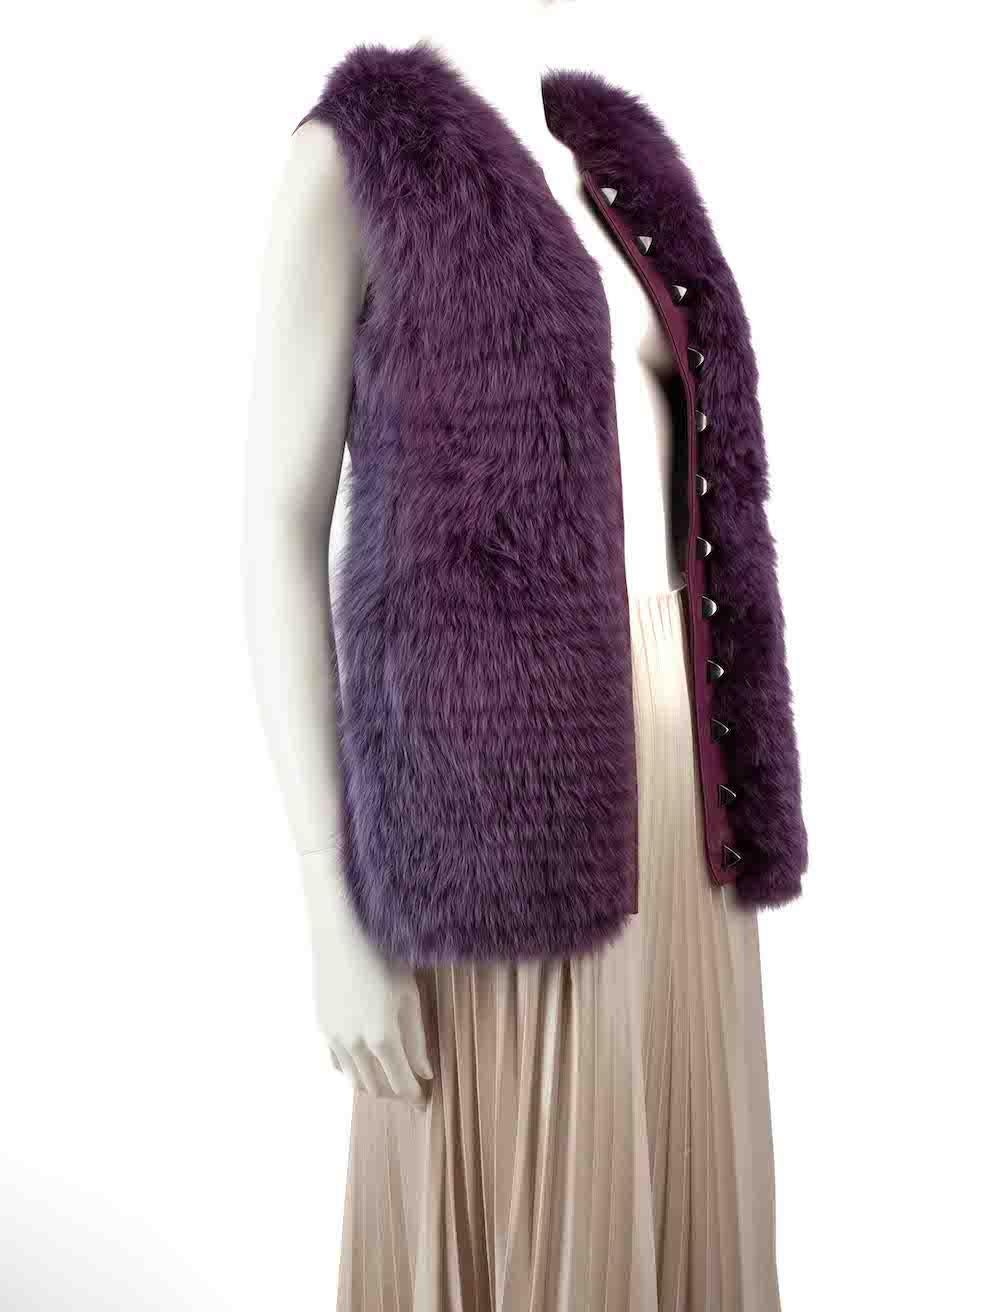 CONDITION is Very good. Minimal wear to vest is evident. Minimal wear to the embroidery detailing with a handful of plucked threads found on this used Philipp Plein designer resale item.
 
 
 
 Details
 
 
 Purple
 
 Leather
 
 Vest
 
 Front fox fur